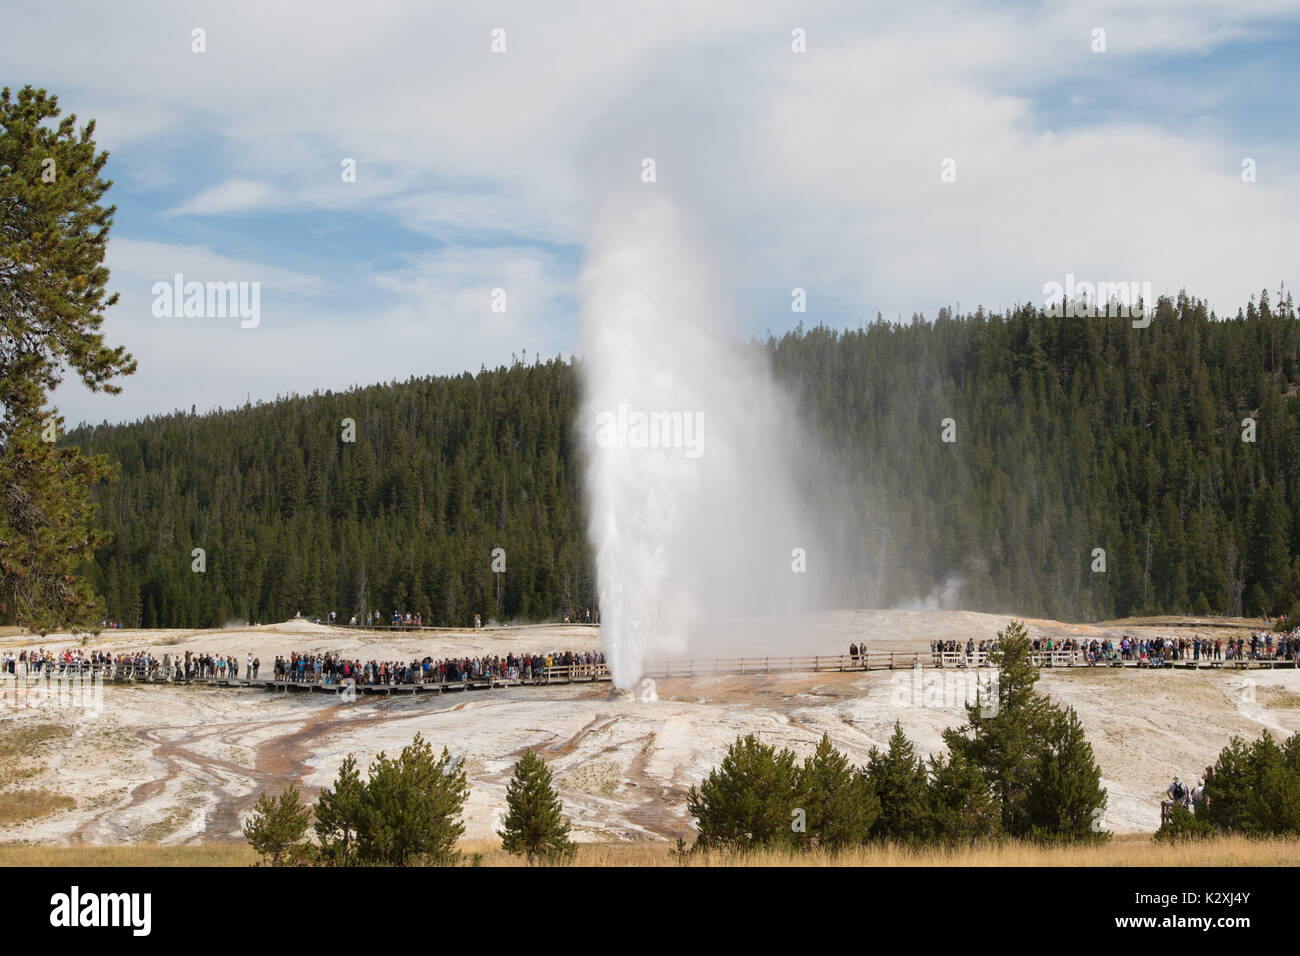 Eruption of the Beehive Geyser in the Upper Basin in Yellowstone National Park, WY Stock Photo